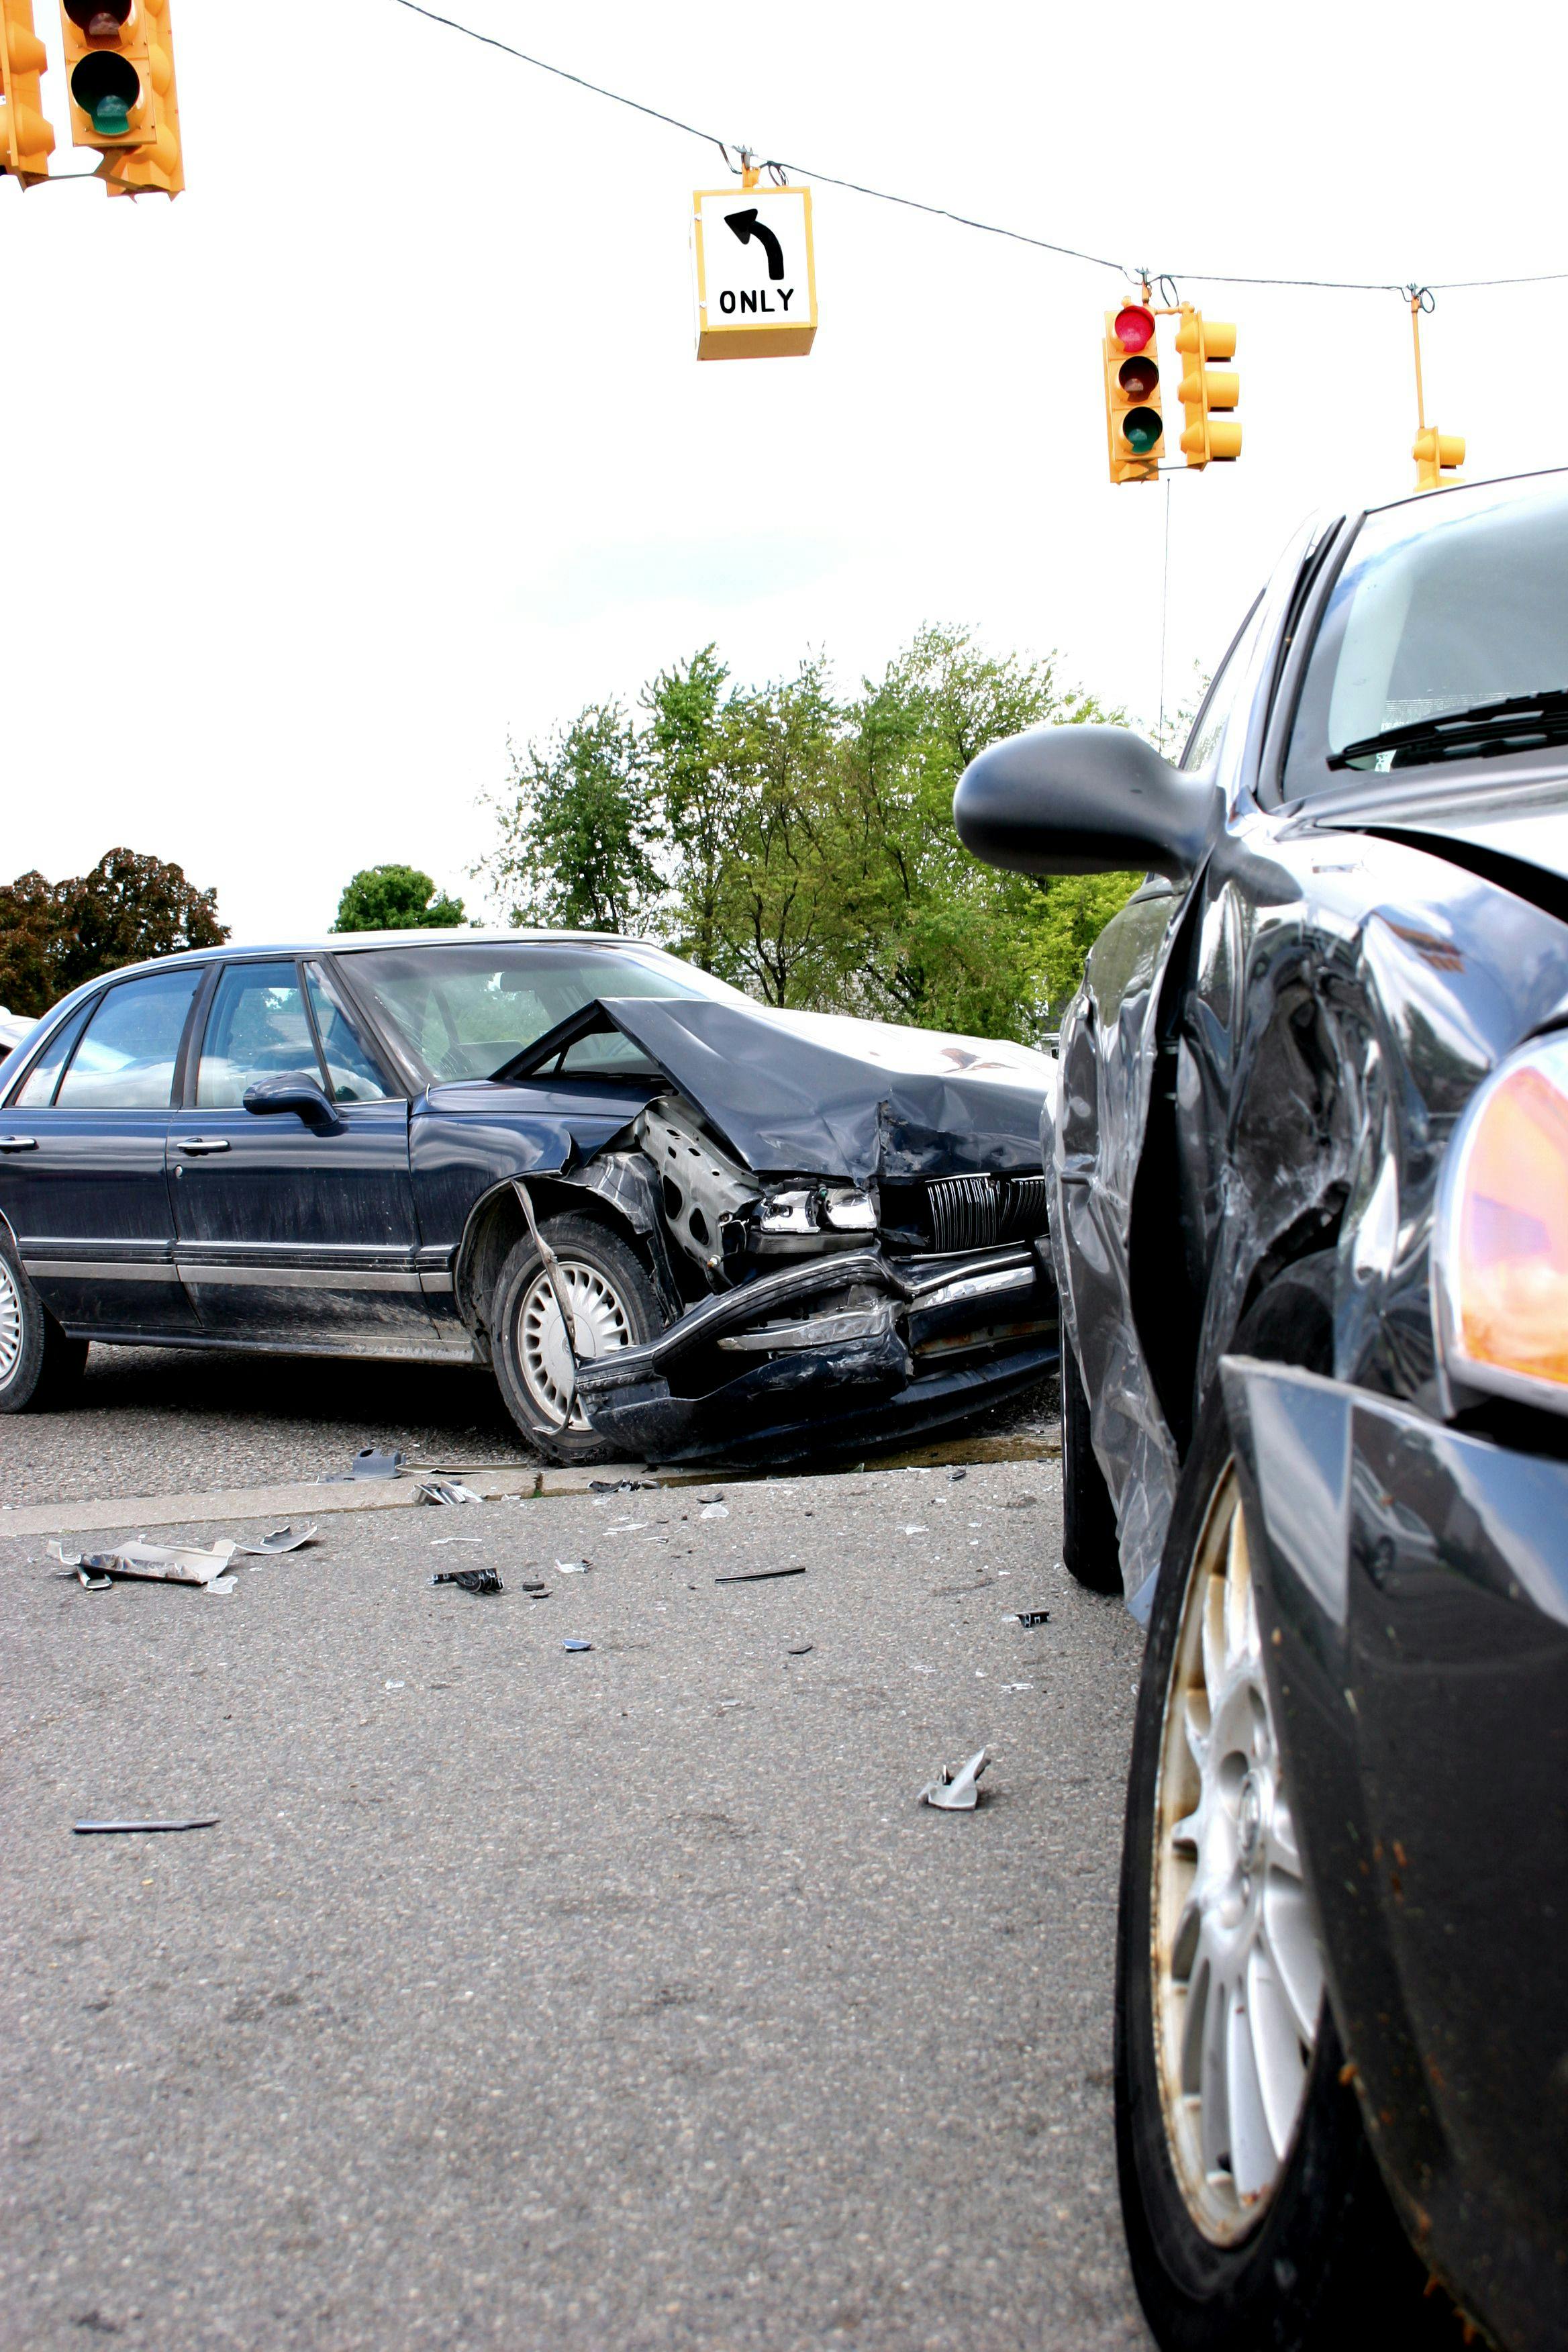 Auto Accident image related